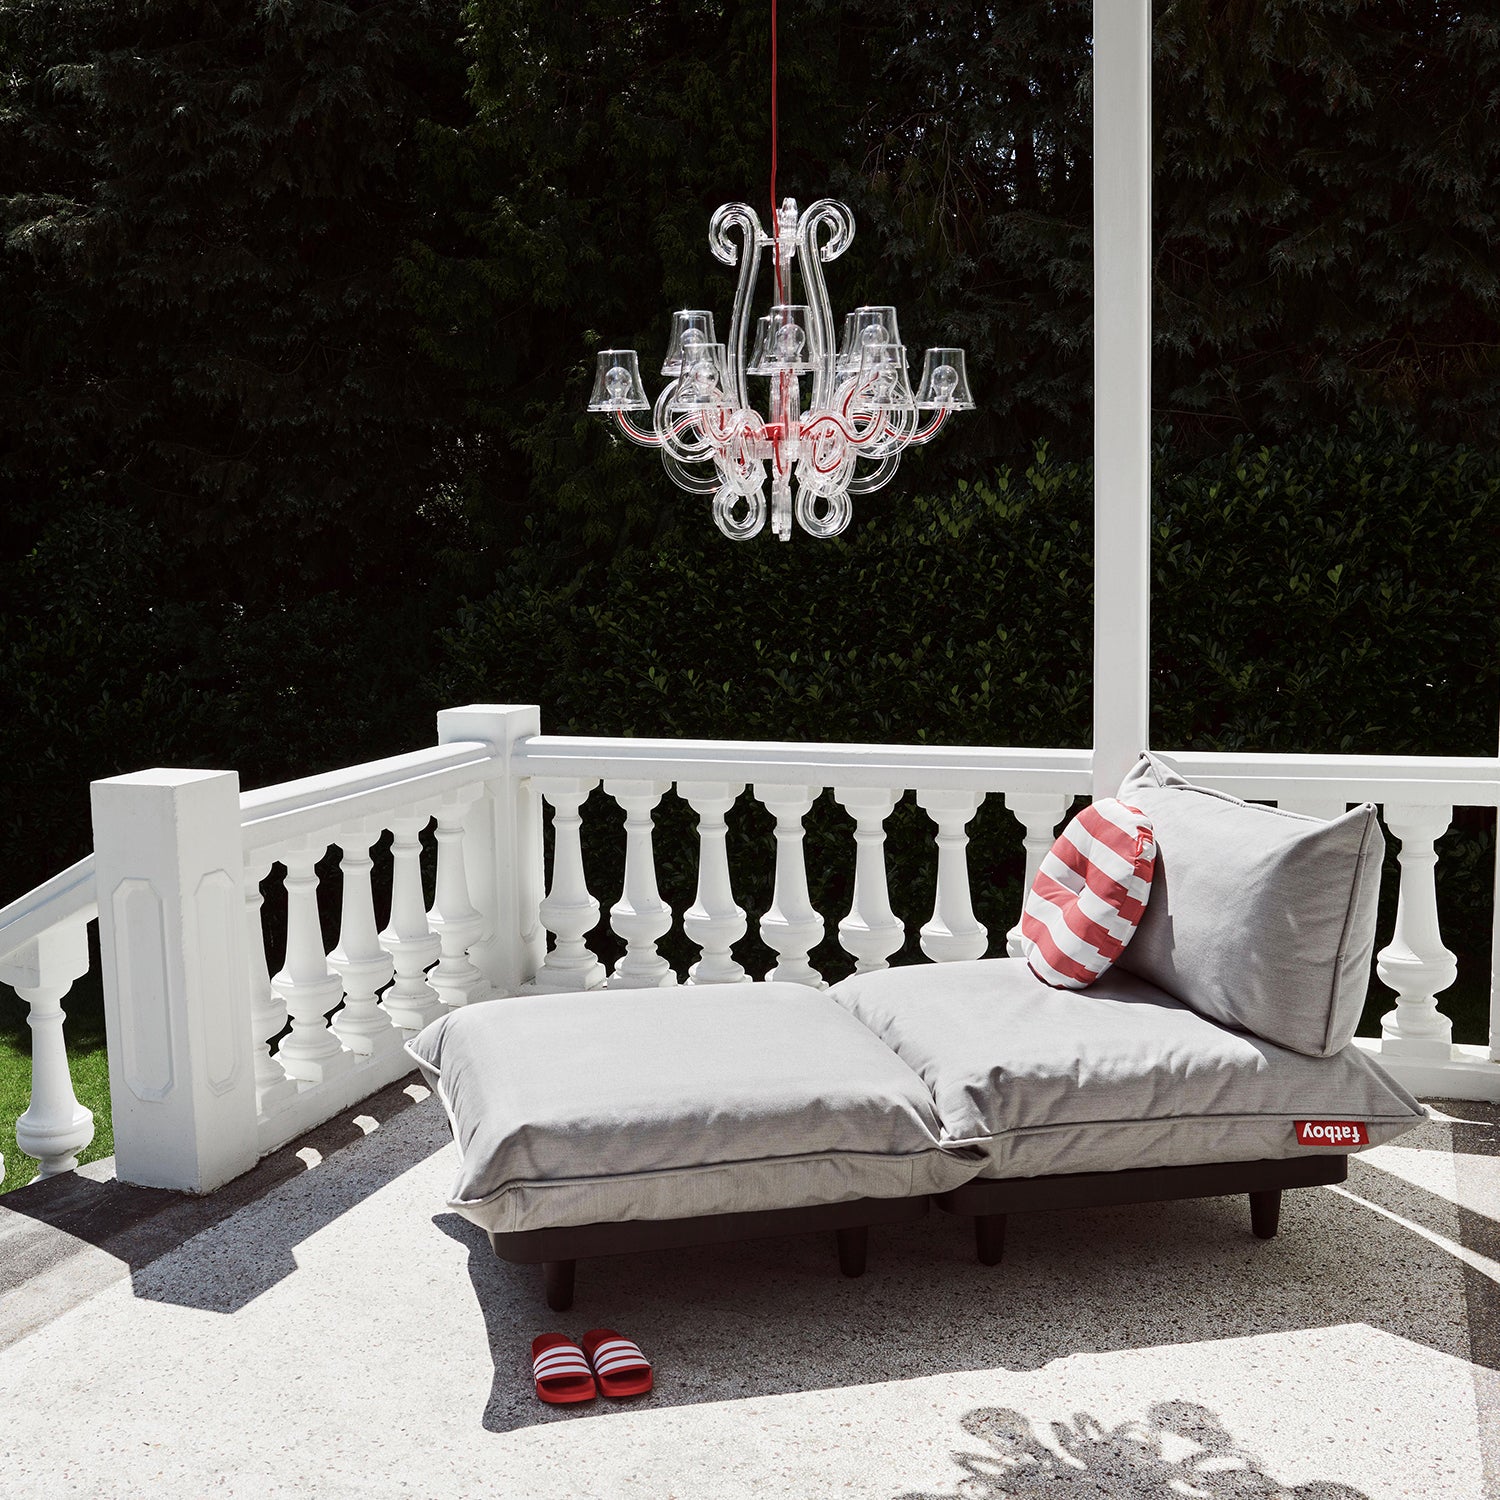 Paletti Daybed - The Design Choice